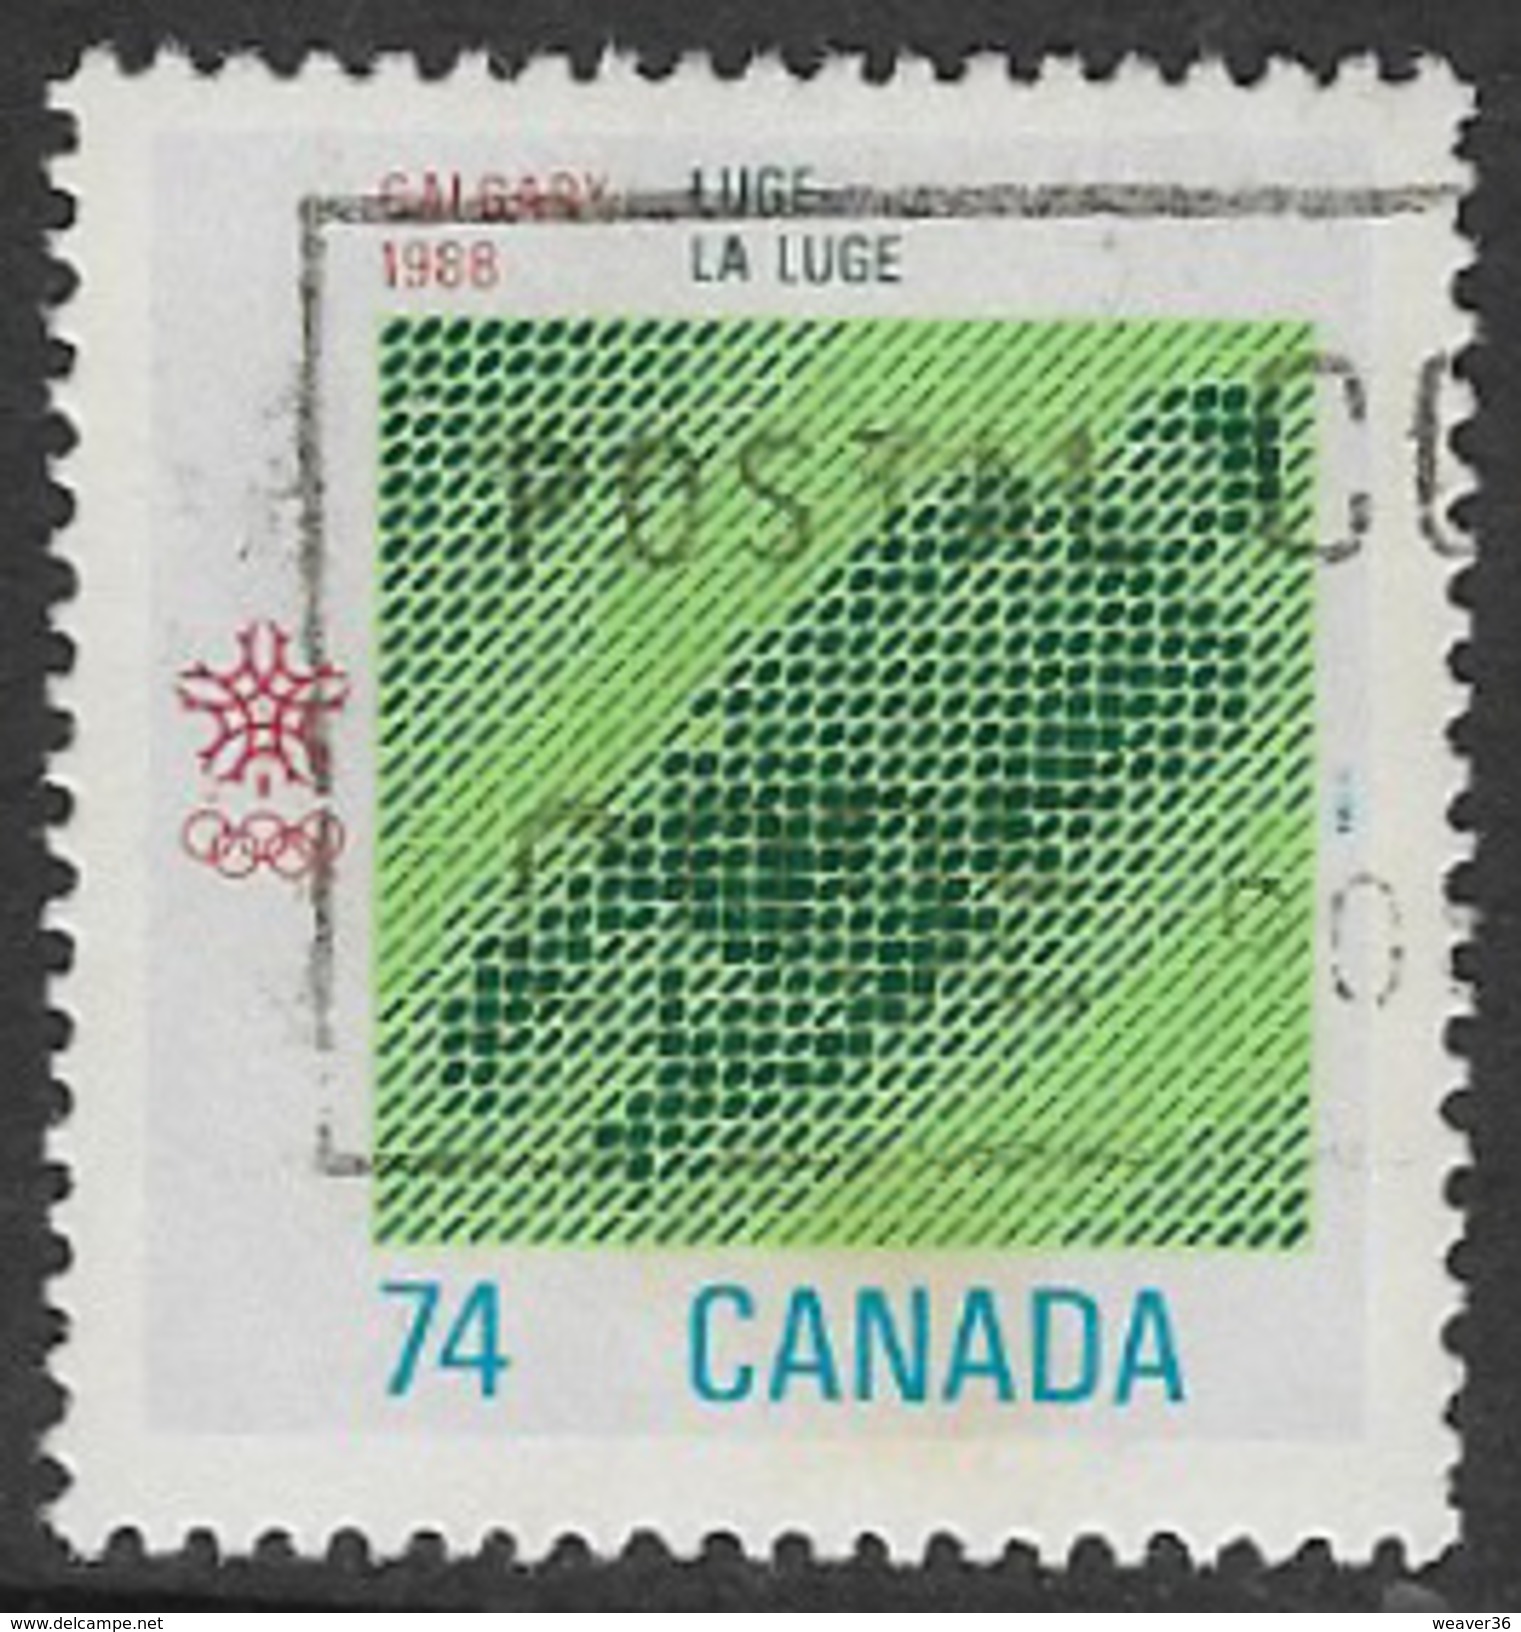 Canada SG1284 1988 Winter Olympic Games, Calgary (5th Issue) 74c Good/fine Used [33/28407/4D] - Used Stamps